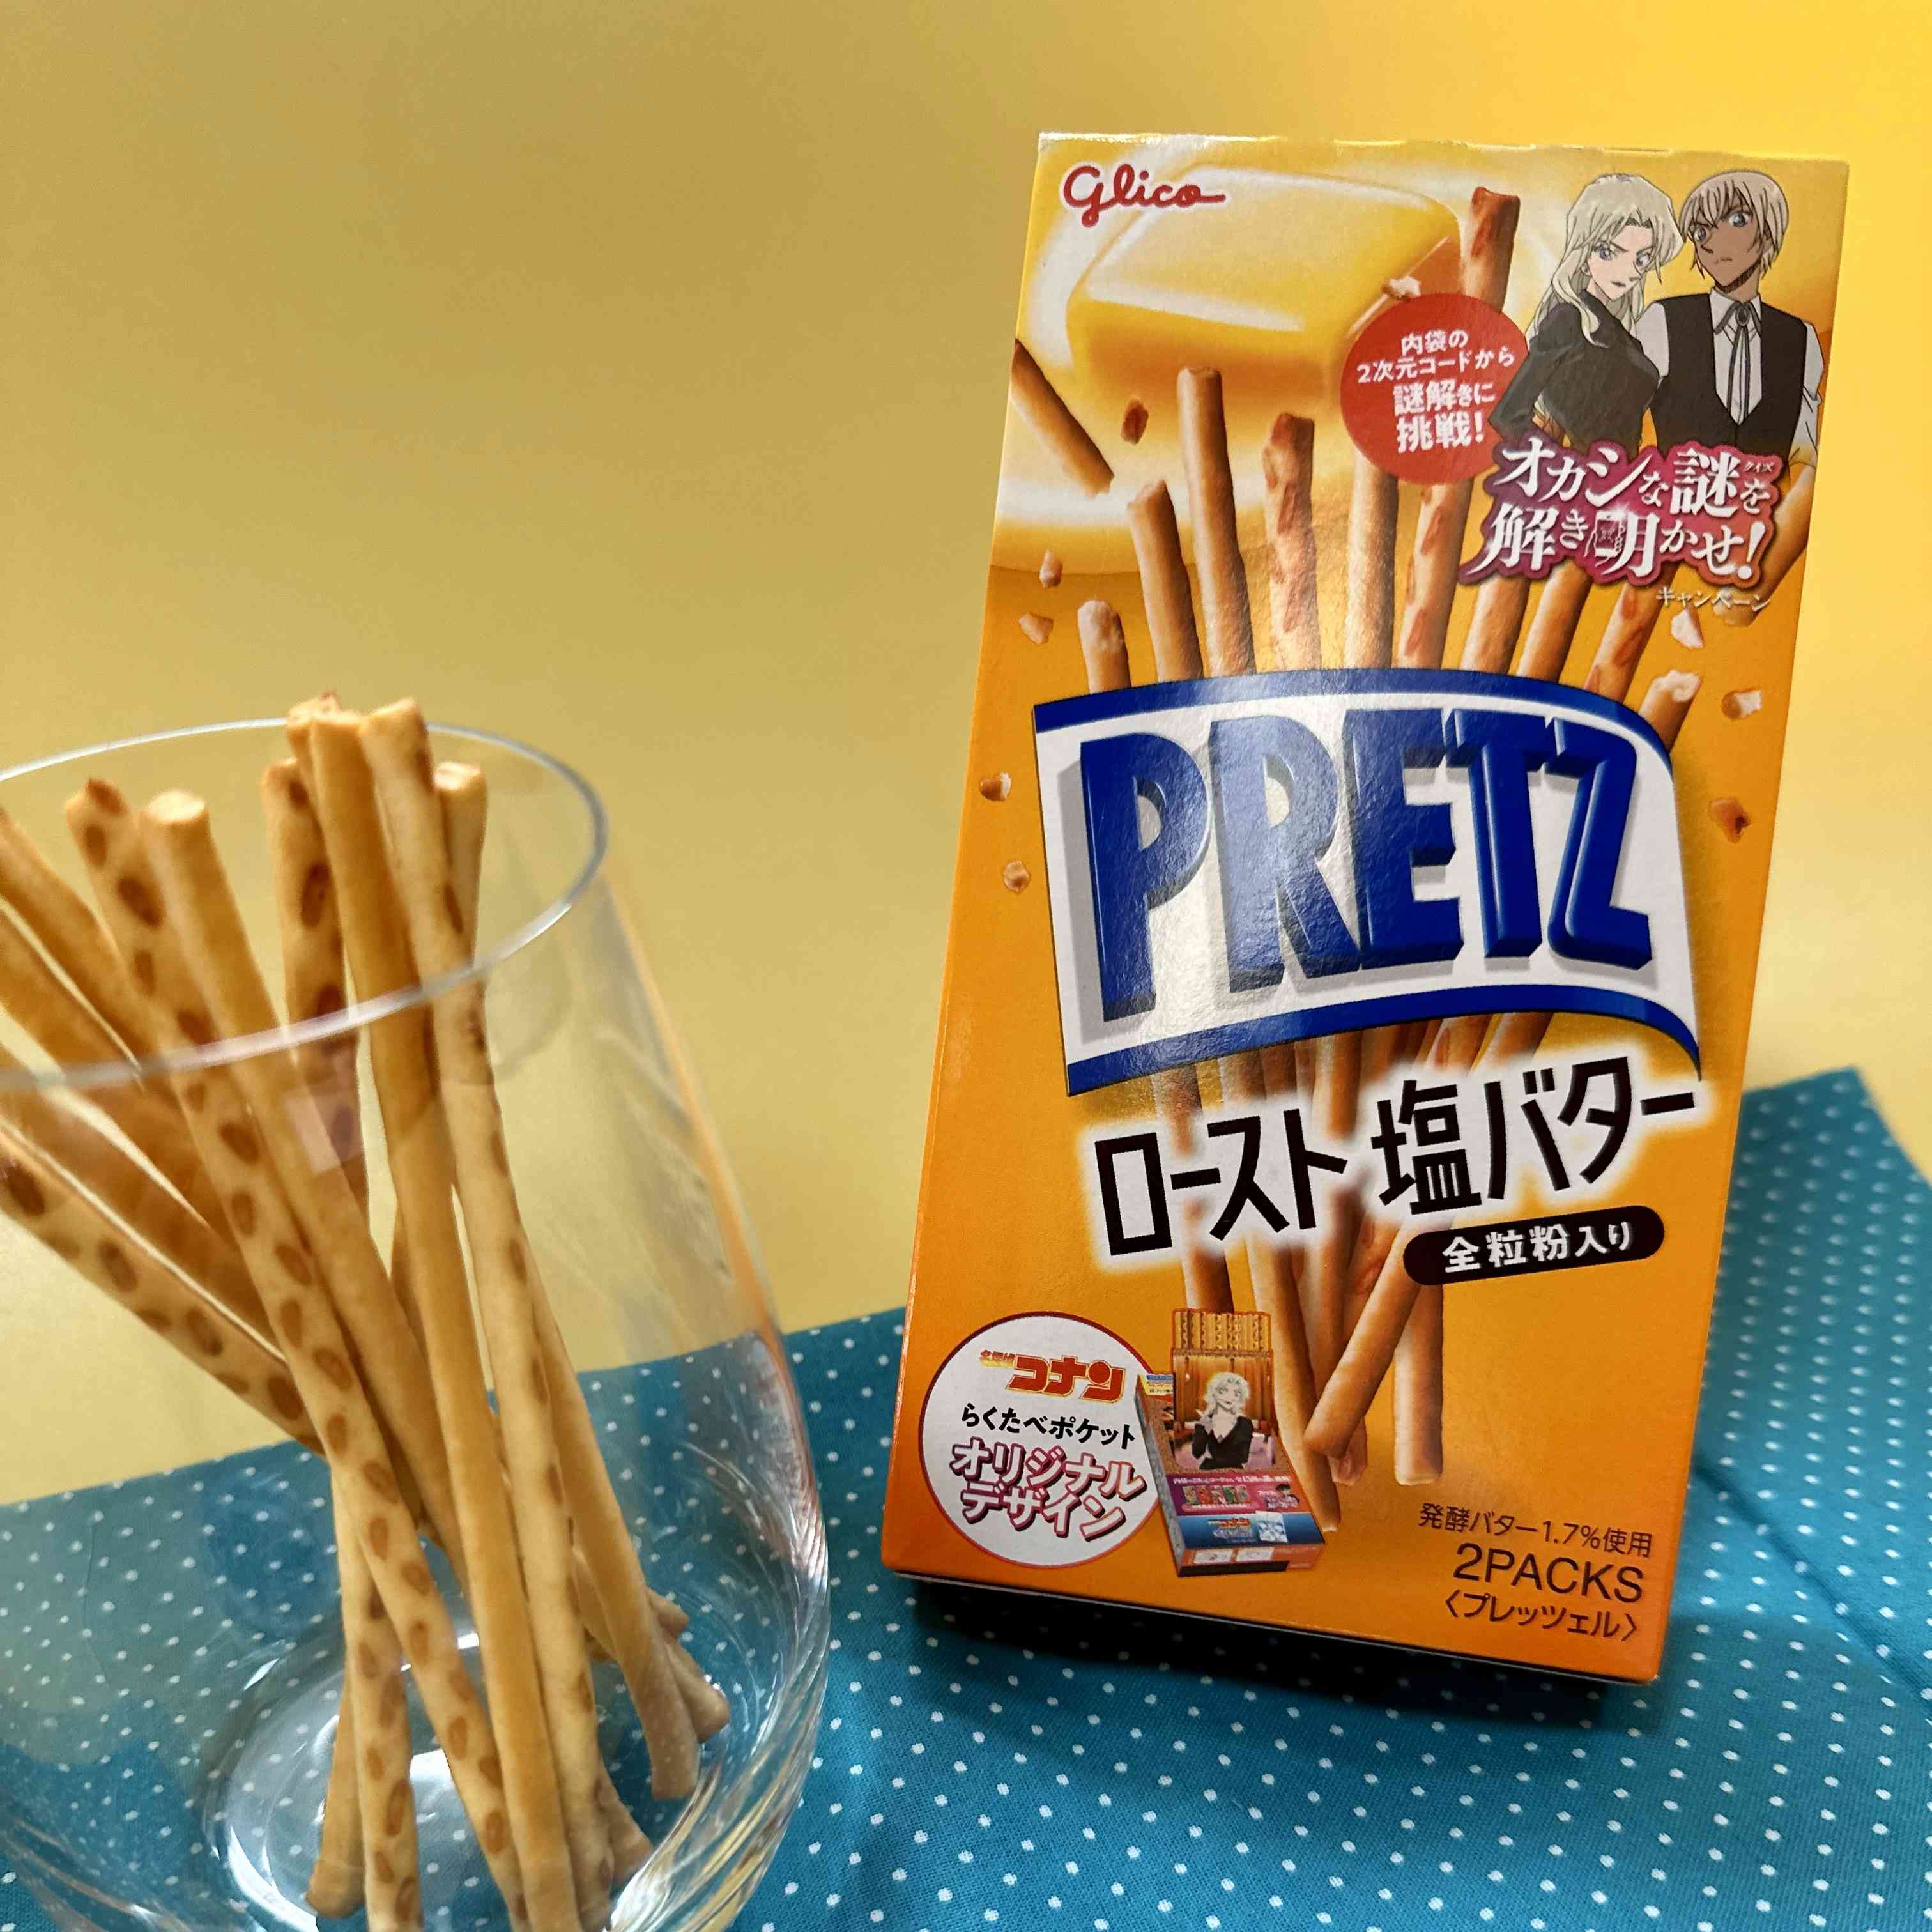 【glico】PRETZ Roasted Salted Butter　1piece　62ｇ